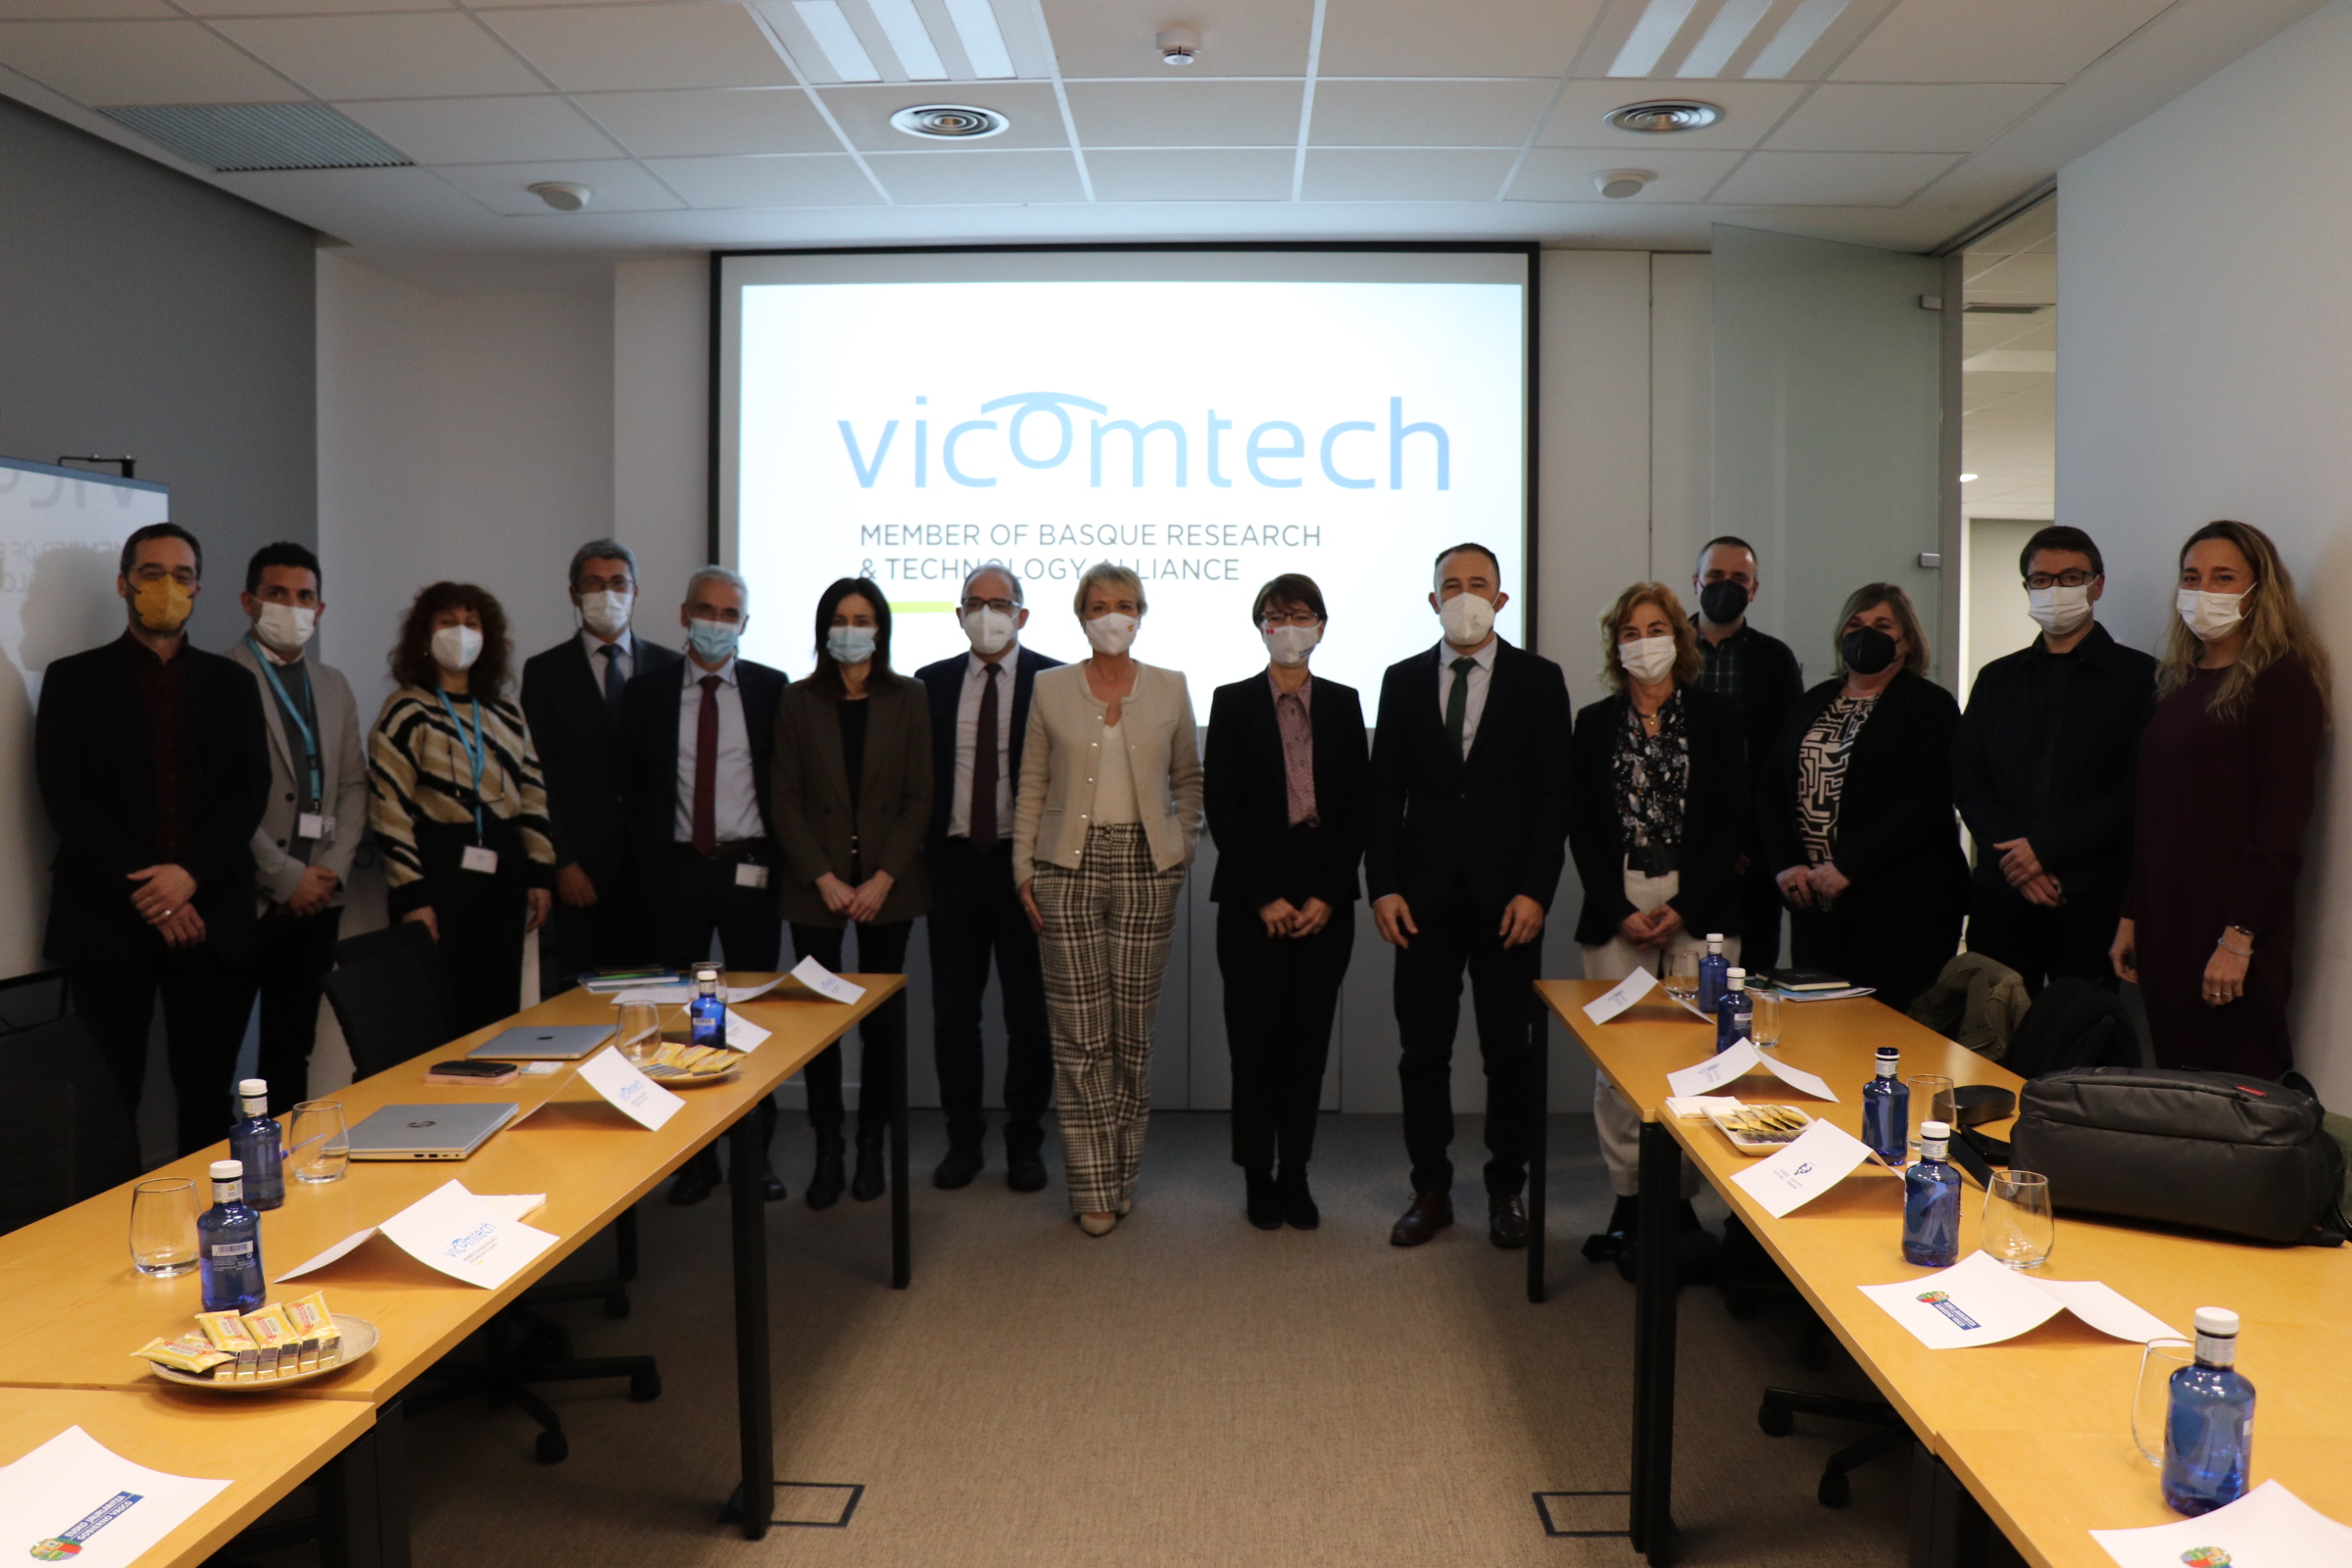 Institutional visit to the Vicomtech headquarters to learn about the capabilities of Artificial Intelligence in language